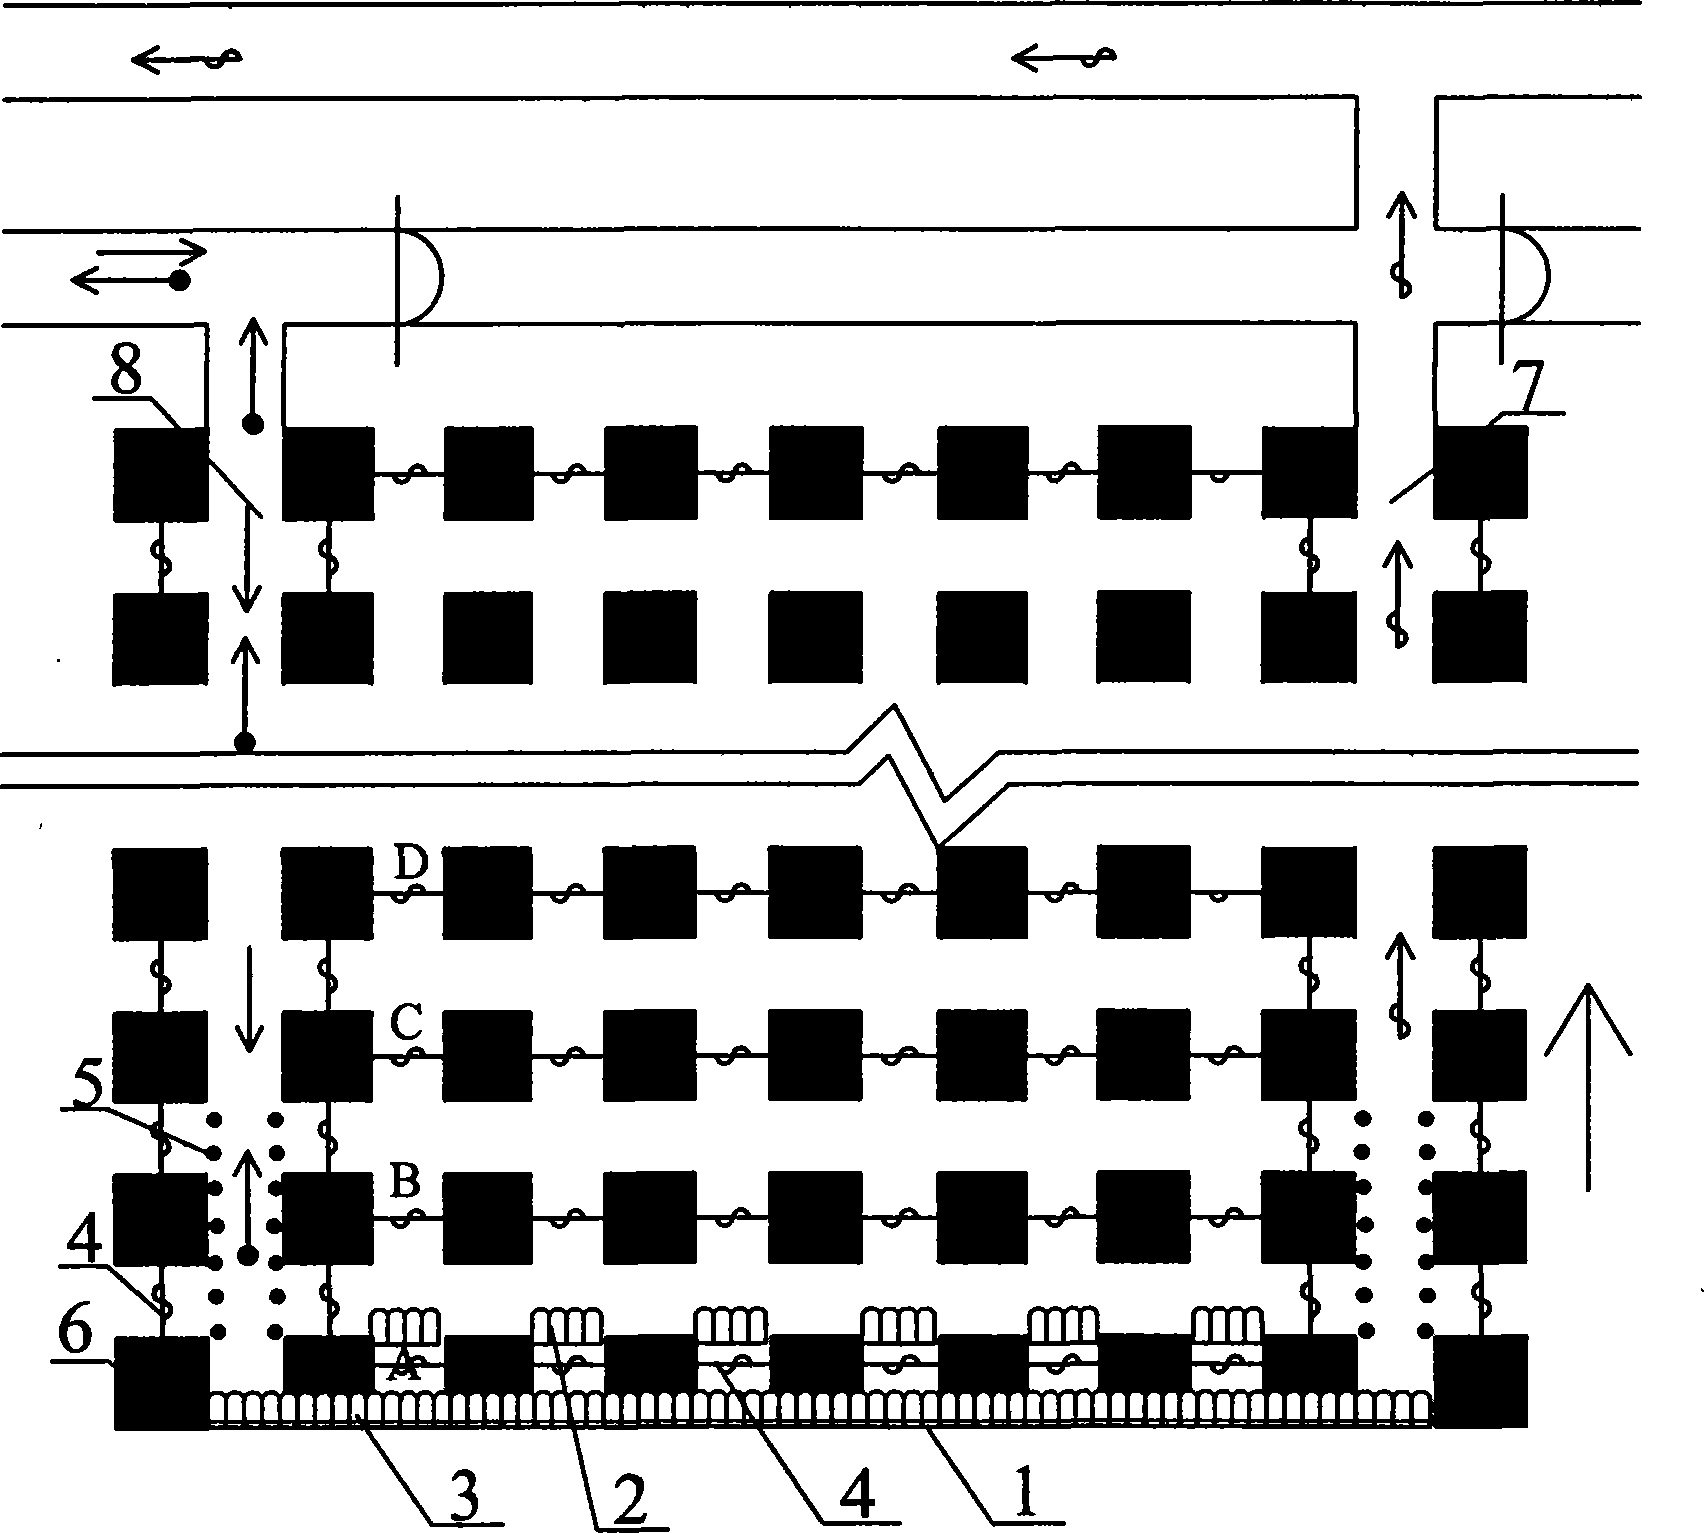 Long-wall integrated-extraction reclaiming room-type coal column mining method